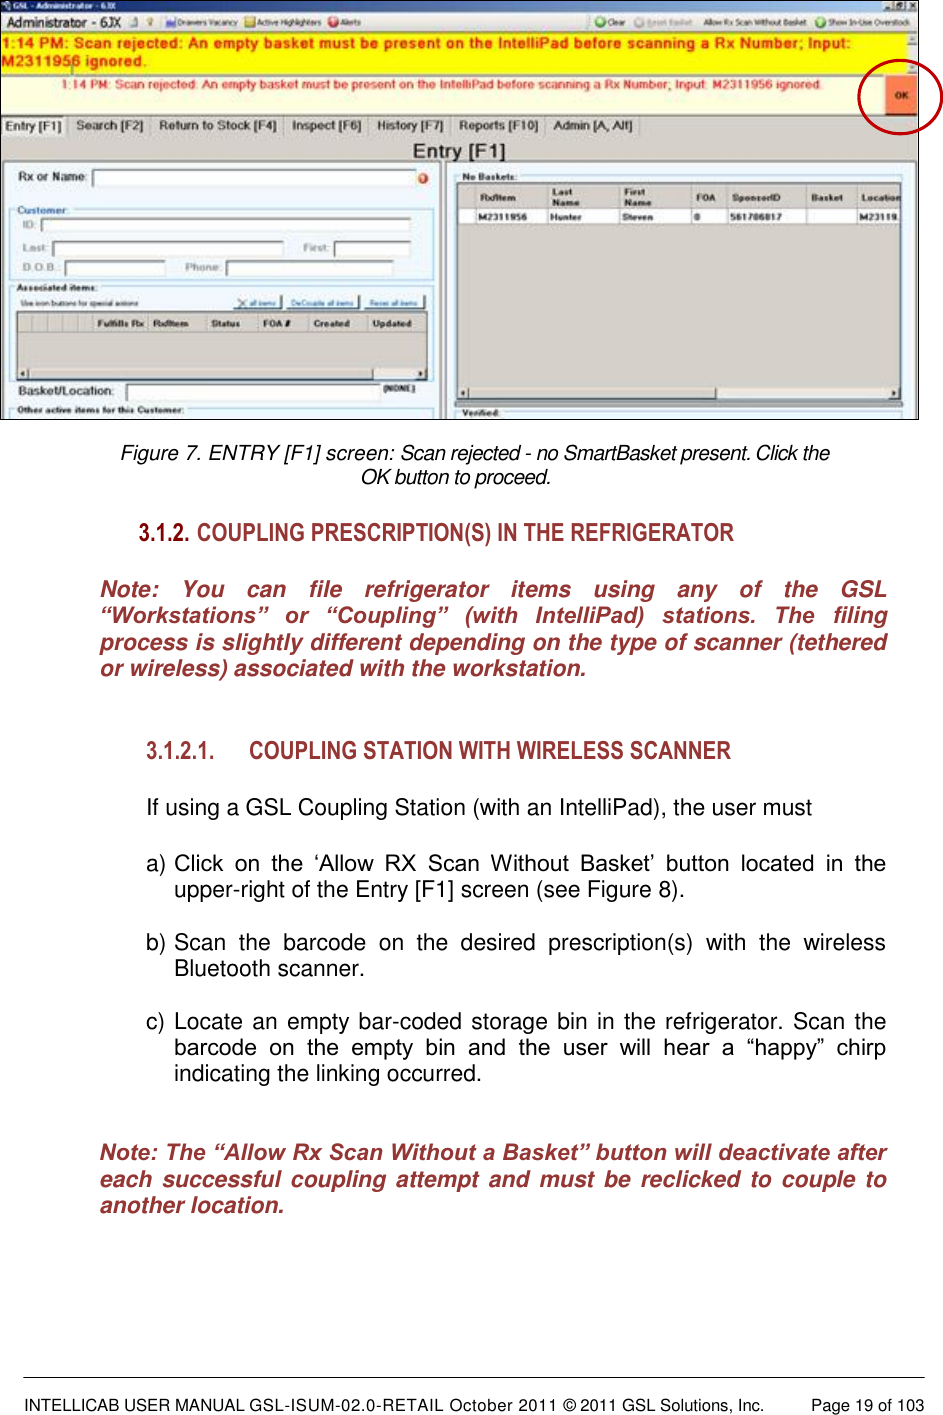  INTELLICAB USER MANUAL GSL-ISUM-02.0-RETAIL October 2011 © 2011 GSL Solutions, Inc.   Page 19 of 103   Figure 7. ENTRY [F1] screen: Scan rejected - no SmartBasket present. Click the  OK button to proceed. 3.1.2.  COUPLING PRESCRIPTION(S) IN THE REFRIGERATOR Note:  You  can  file  refrigerator  items  using  any  of  the  GSL “Workstations”  or  “Coupling”  (with  IntelliPad)  stations.  The  filing process is slightly different depending on the type of scanner (tethered or wireless) associated with the workstation.  3.1.2.1. COUPLING STATION WITH WIRELESS SCANNER  If using a GSL Coupling Station (with an IntelliPad), the user must  a) Click  on  the  ‘Allow  RX  Scan  Without  Basket’  button  located  in  the upper-right of the Entry [F1] screen (see Figure 8).  b) Scan  the  barcode  on  the  desired  prescription(s)  with  the  wireless Bluetooth scanner.  c) Locate an empty bar-coded storage bin in the refrigerator. Scan the barcode  on  the  empty  bin  and  the  user  will  hear  a  “happy”  chirp indicating the linking occurred.    Note: The “Allow Rx Scan Without a Basket” button will deactivate after each successful  coupling attempt and  must be  reclicked to couple to another location.  